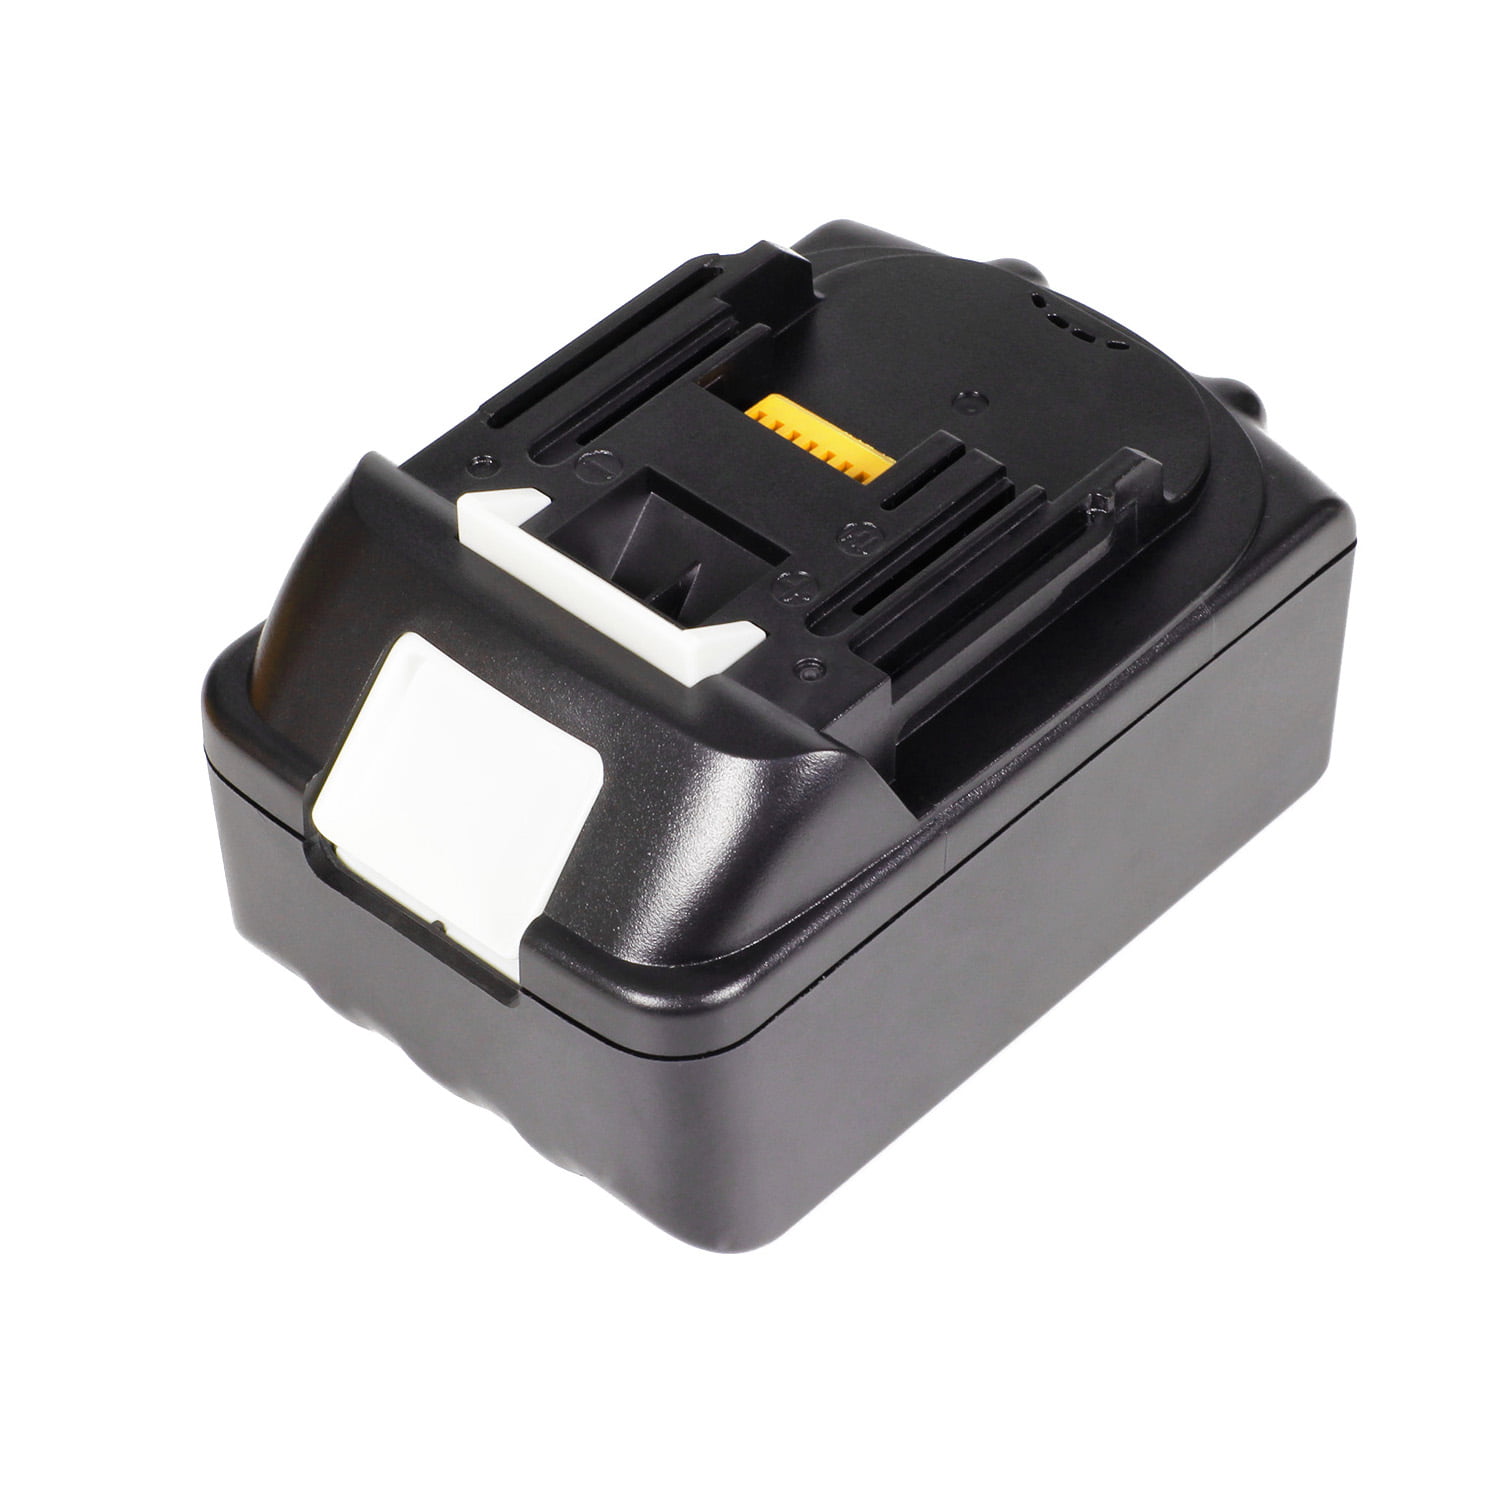 NEW FOR MAKITA BL1840B 5.0AH 18V LXT LITHIUM-ION BATTERY BL1850 BL1830 194205-3 